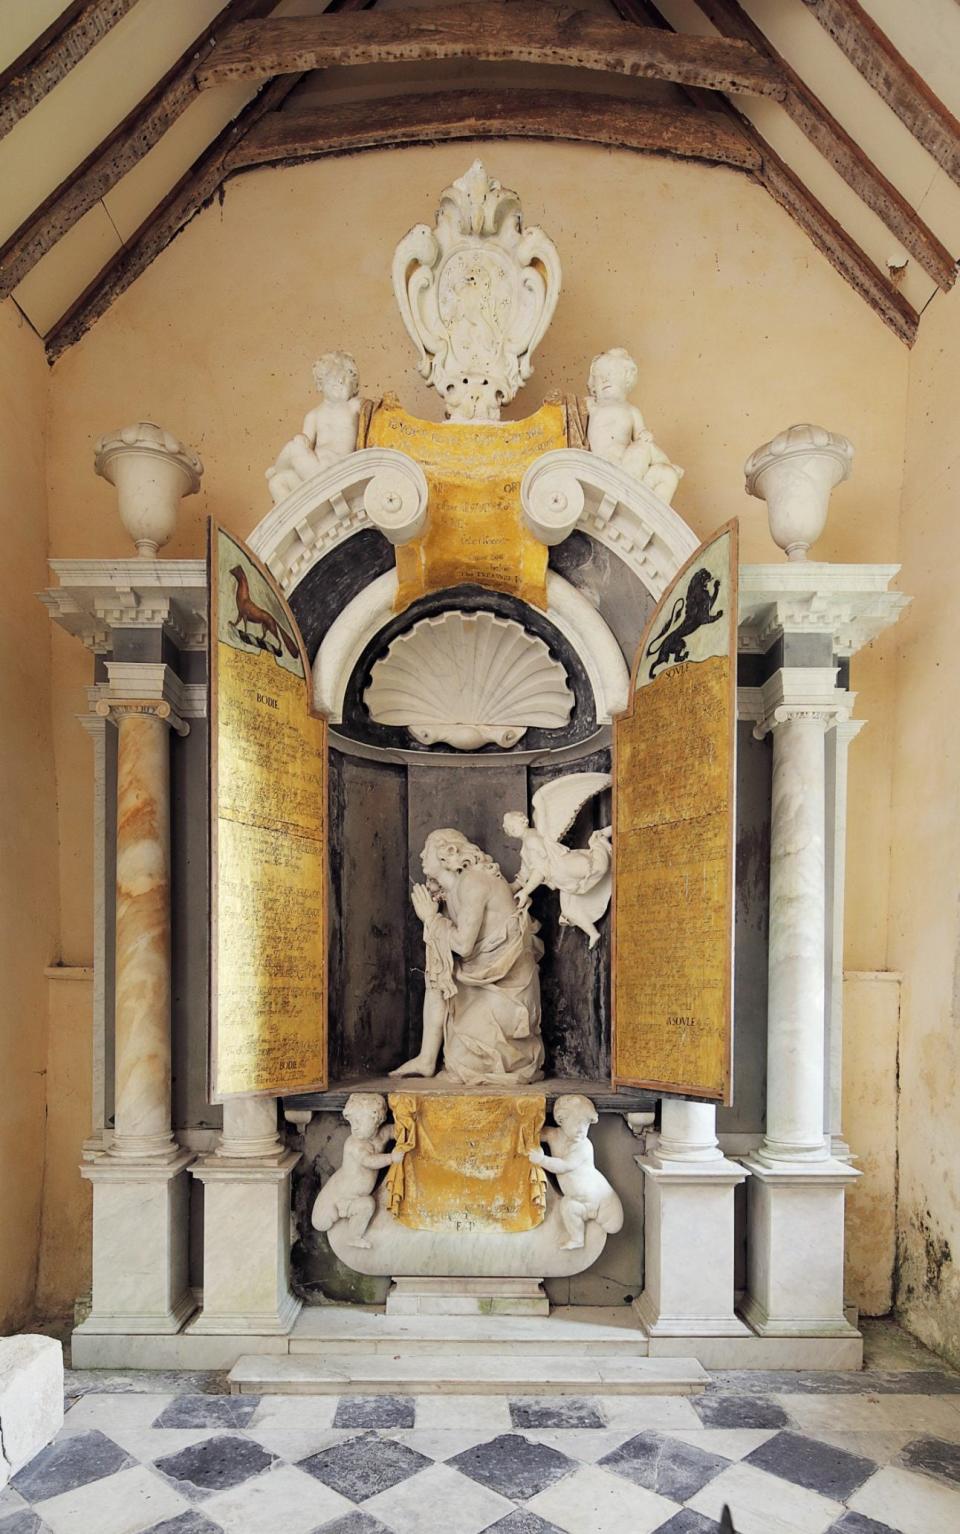 Final leg: at West Dean in Wiltshire, Robert Pierrepont (1634-69), who died after having his leg cut off – thereby missing out on two earldoms – is depicted in his burial shroud, his right leg sawn through, rising at the Last Judgment - CB Newham